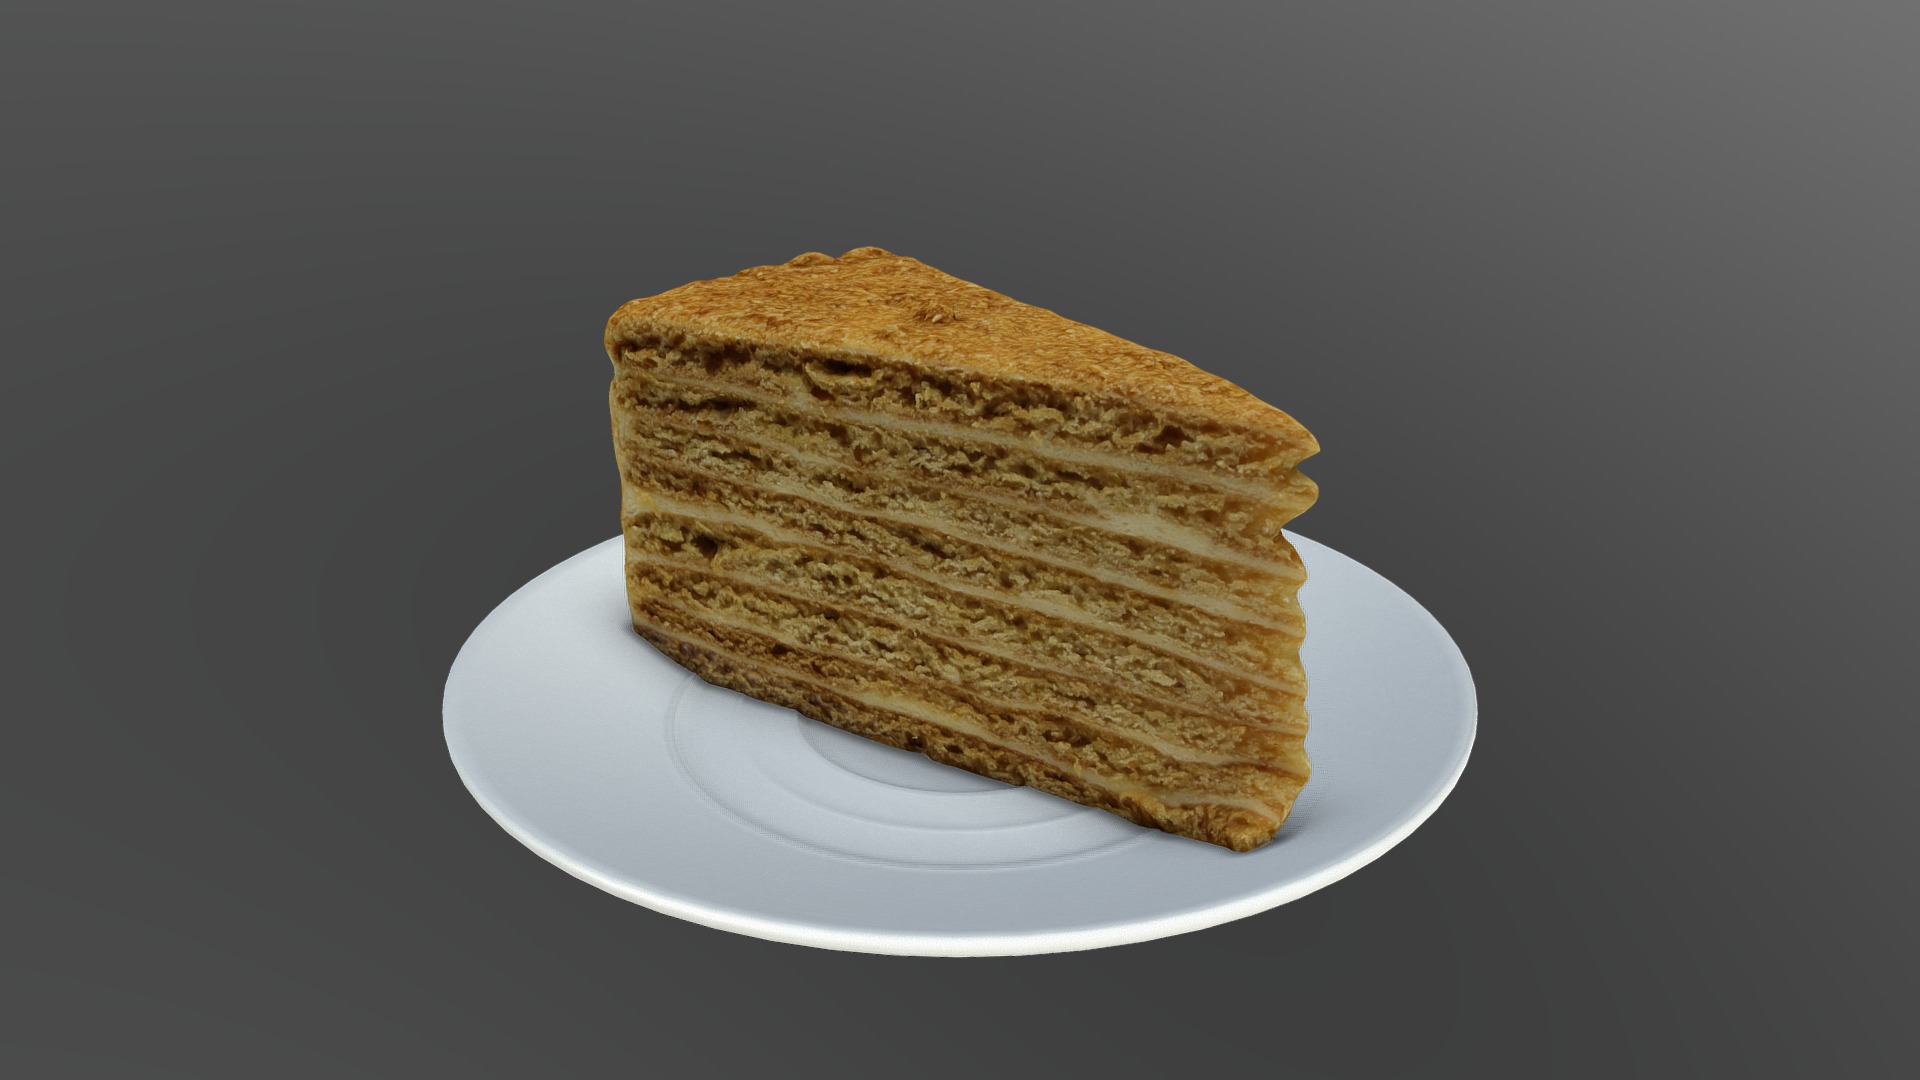 3D model 10PIG - This is a 3D model of the 10PIG. The 3D model is about a stack of bread on a plate.